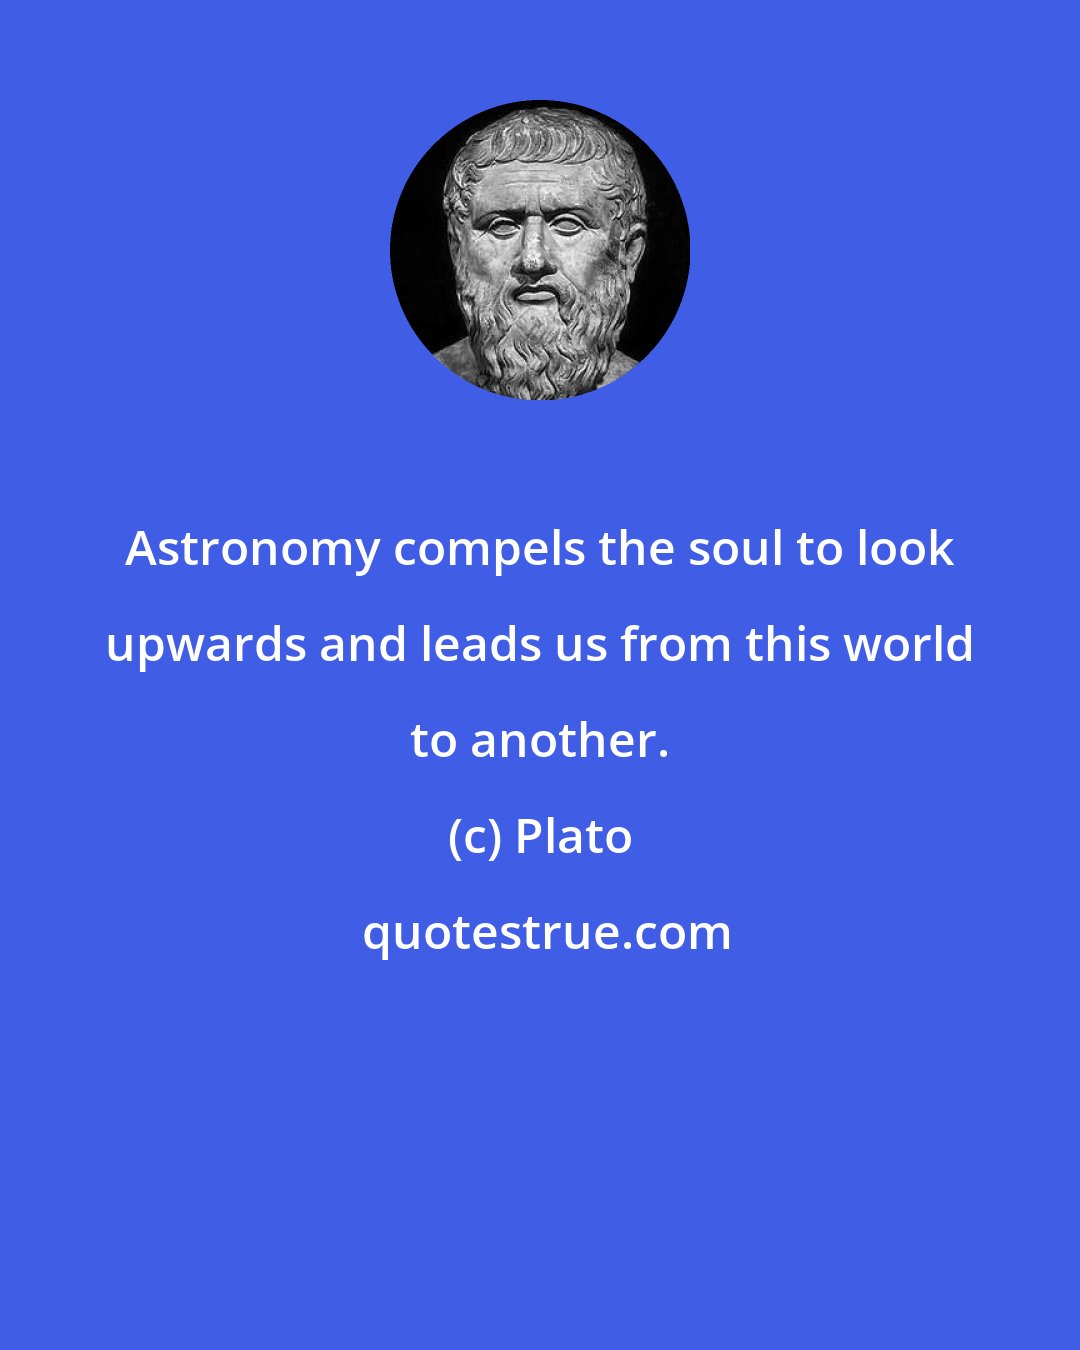 Plato: Astronomy compels the soul to look upwards and leads us from this world to another.